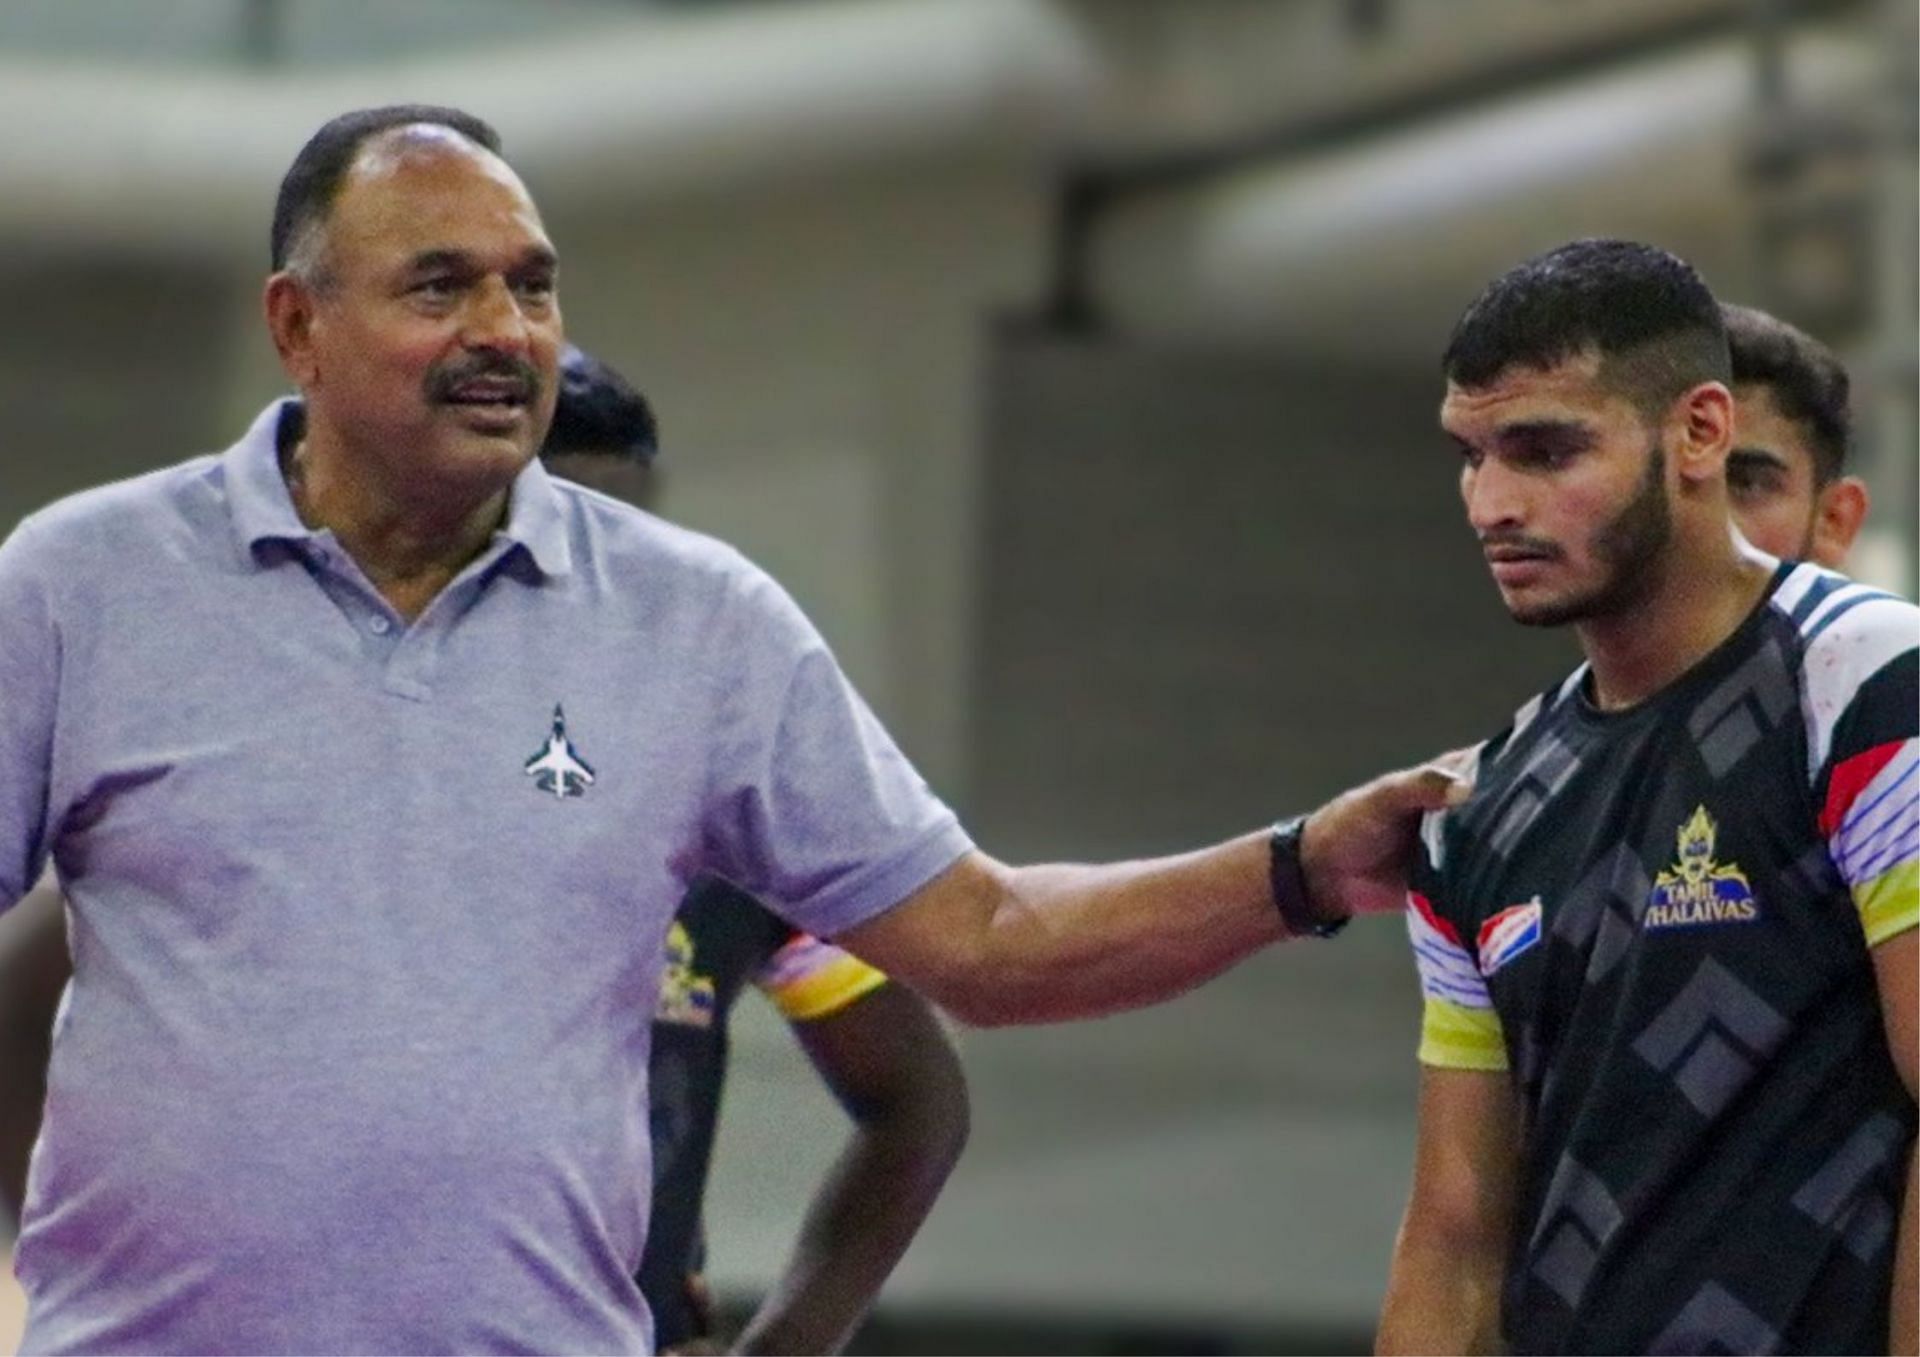 Ashan Kumar (L) is helming the Tamil Thalaivas for a second straight year, this time from the start of the season (Picture Credits: X/Tamil Thalaivas).